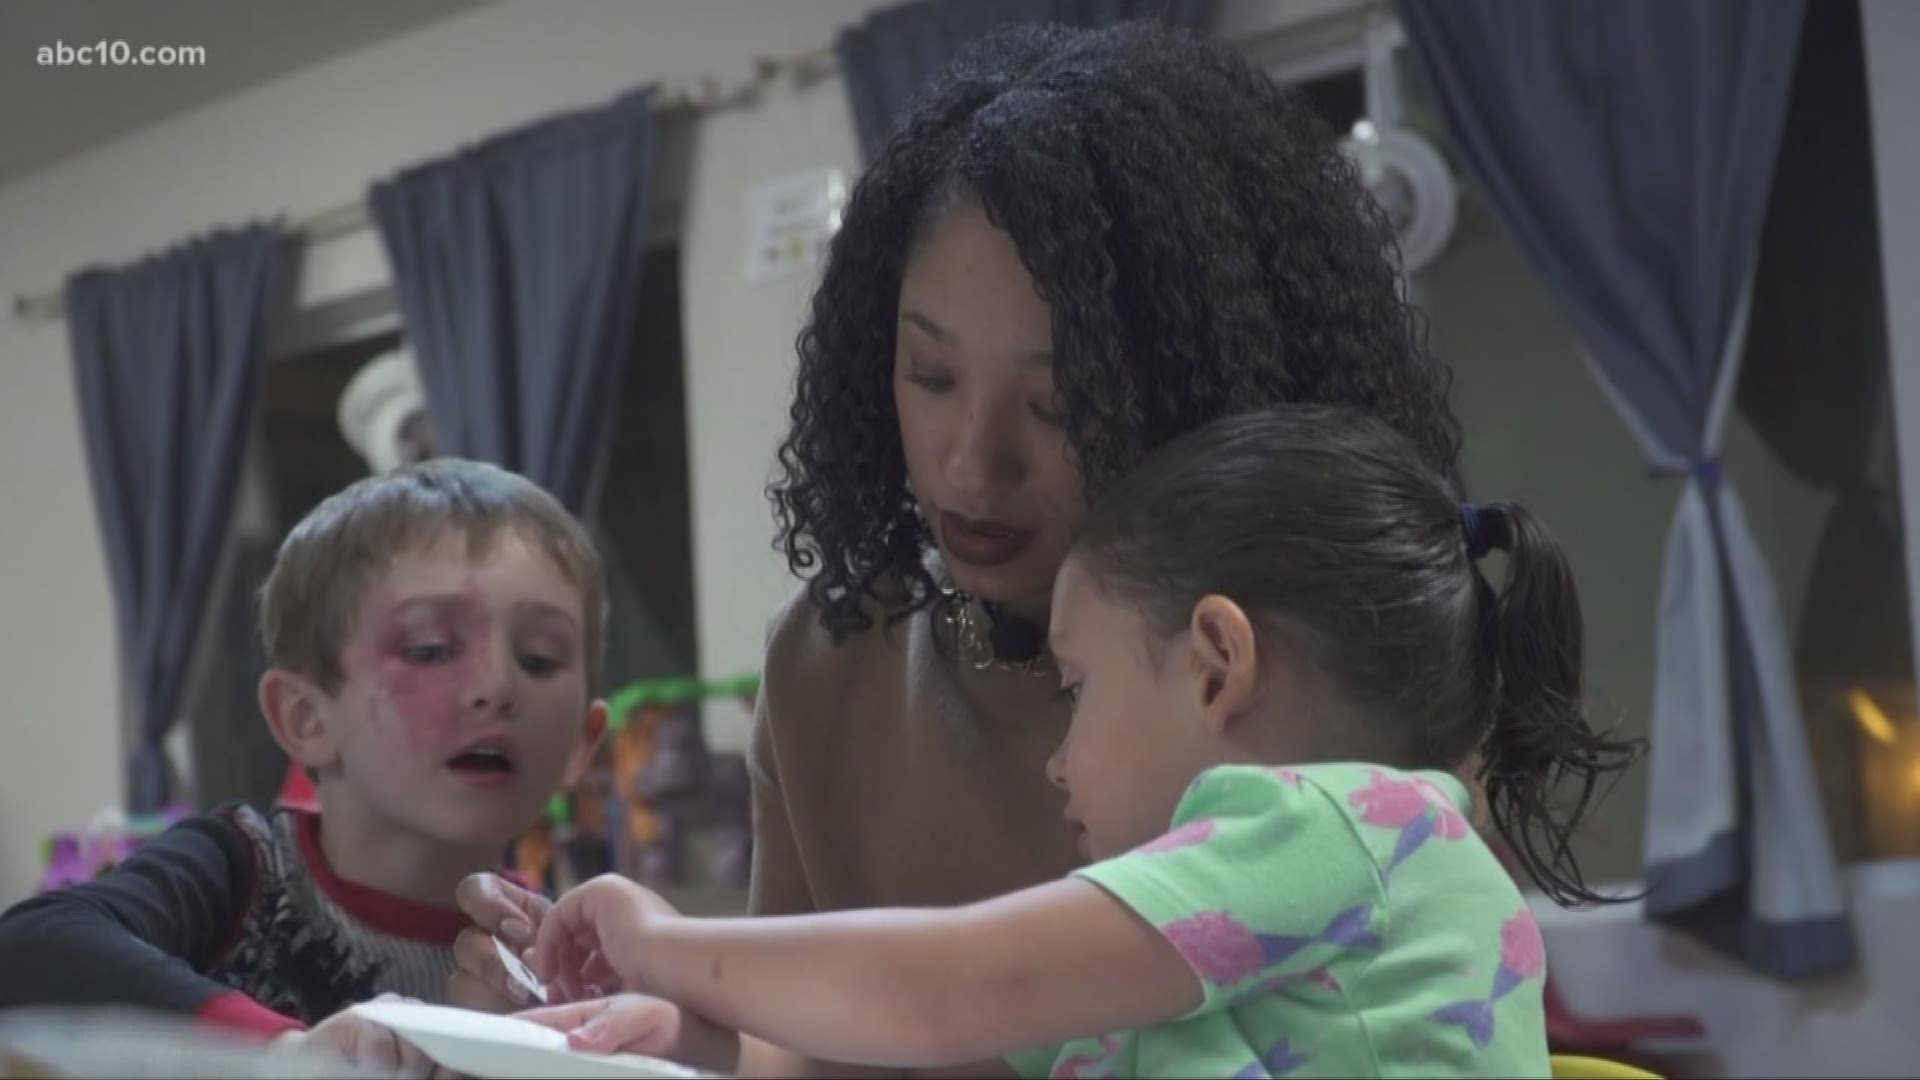 A free crisis nursery program is proving to be very helpful for Sacramento County families.